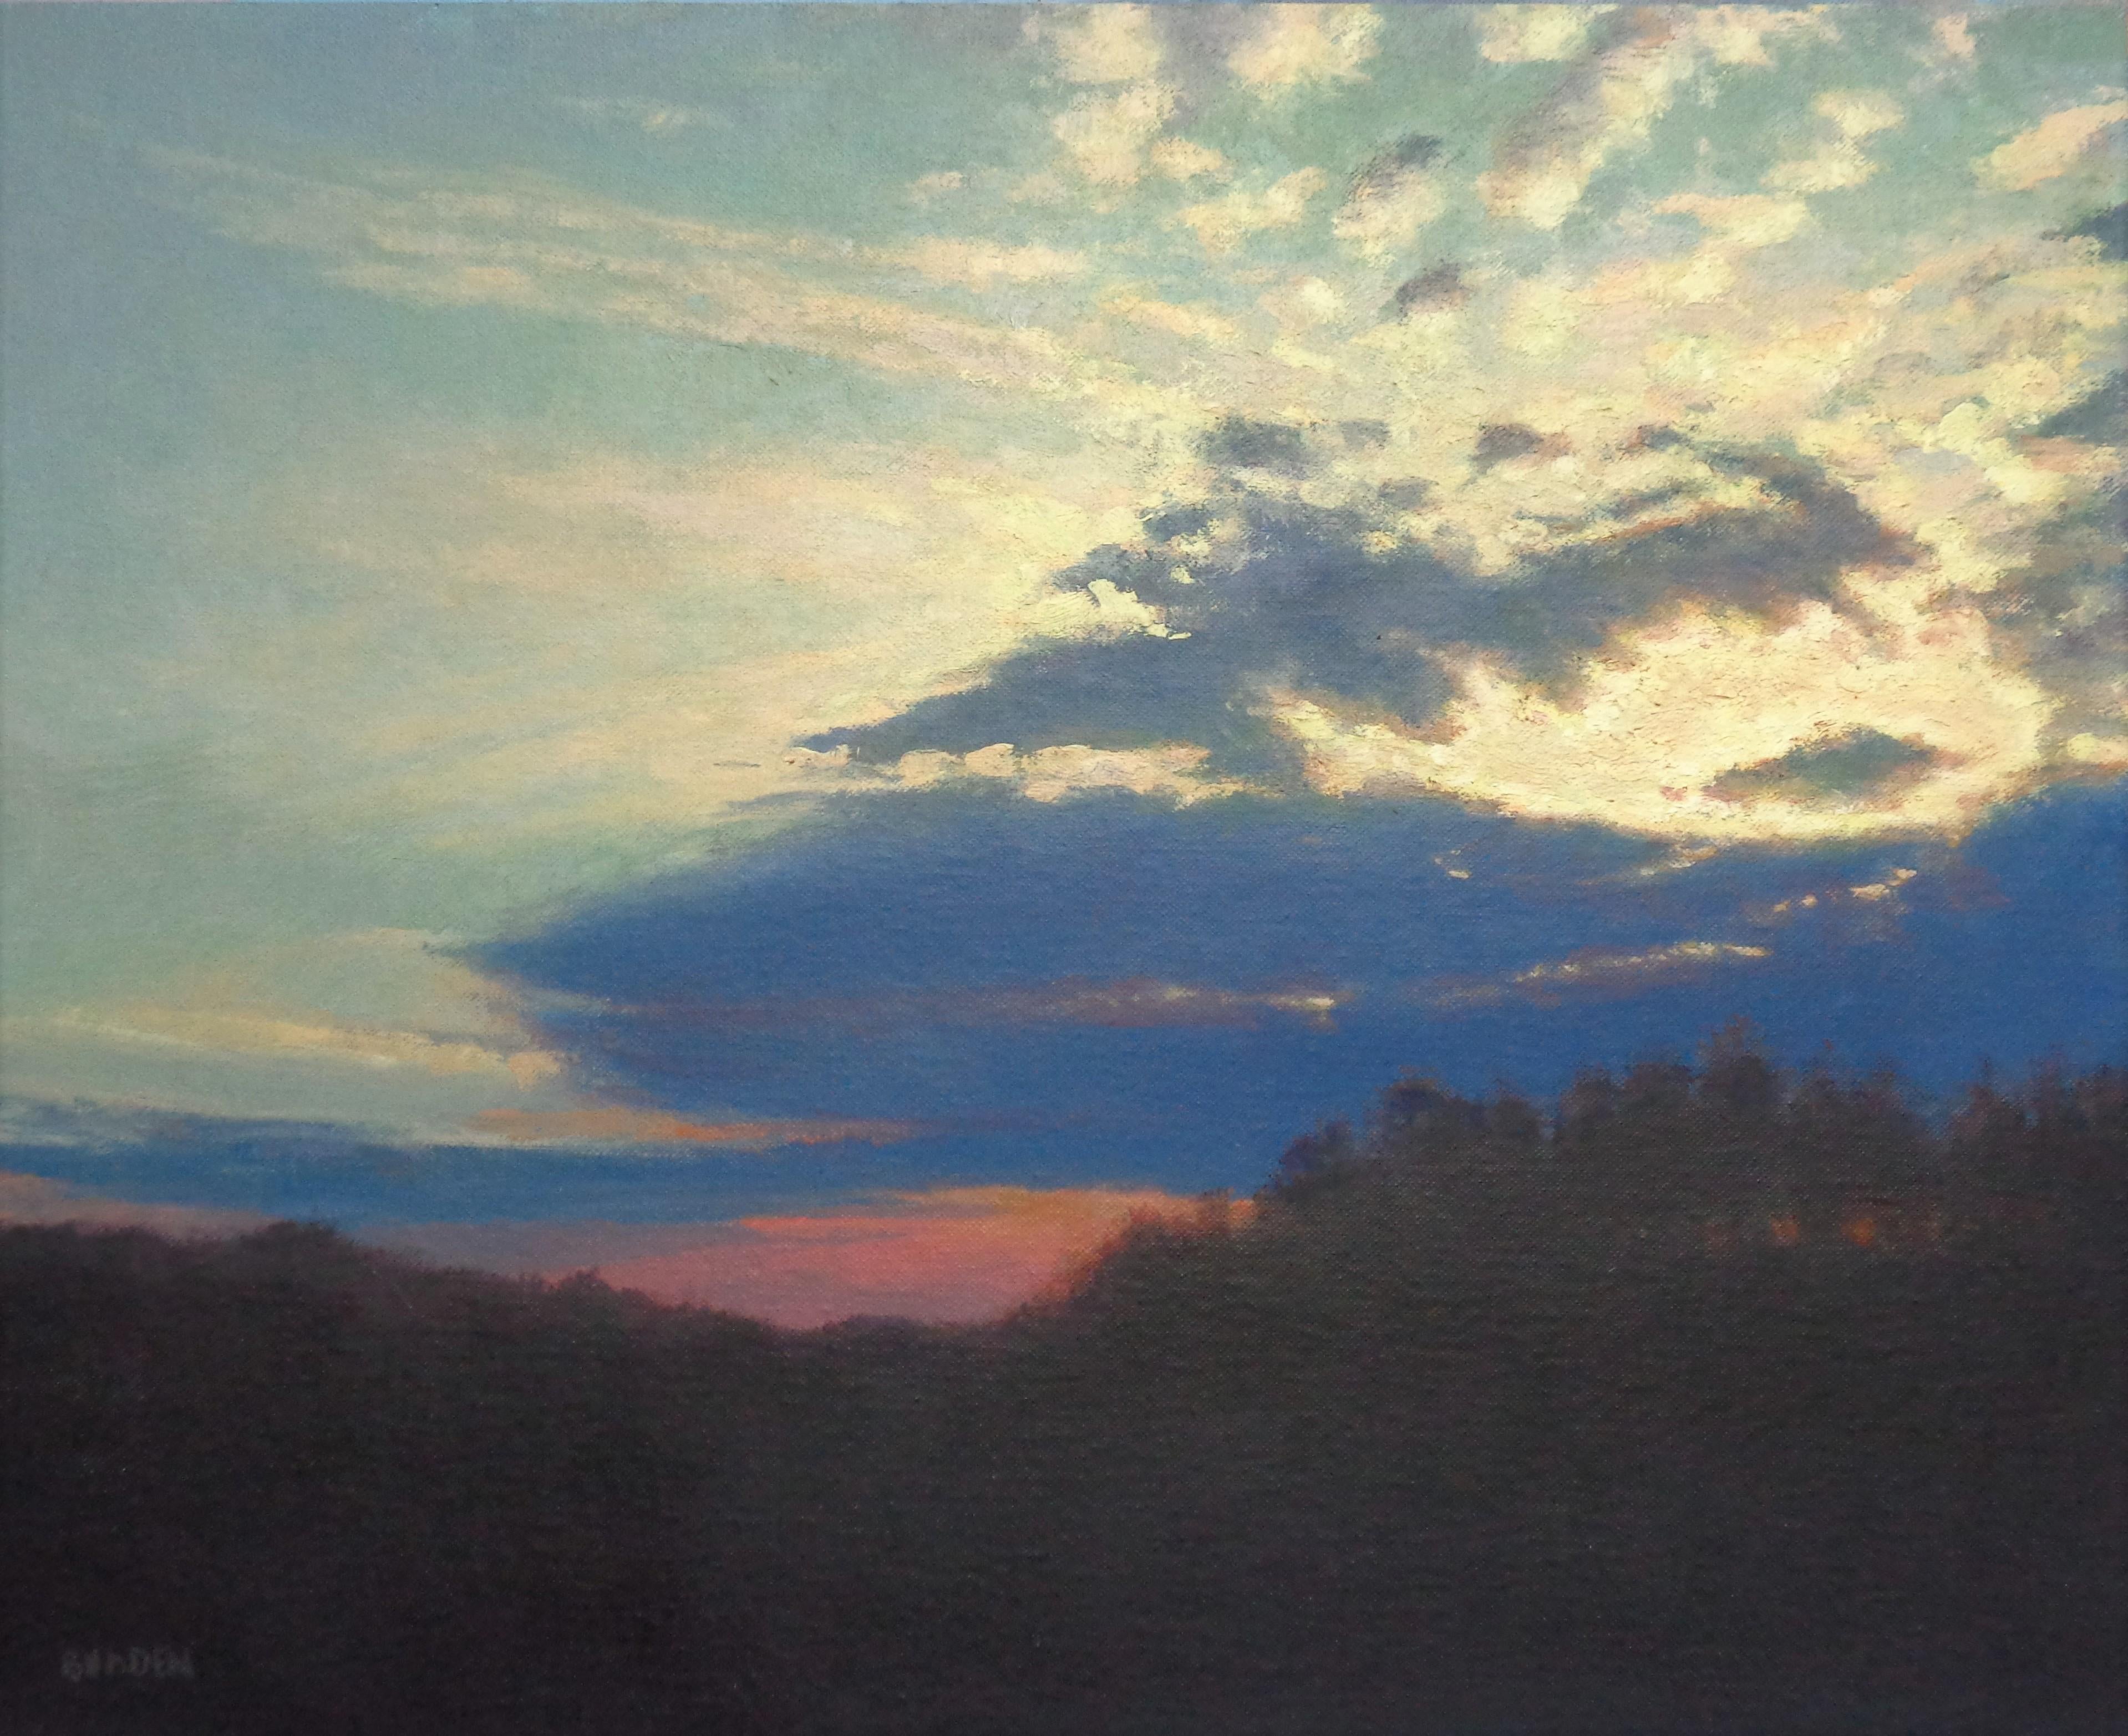 Beautiful Skies Series
oil/panel 16 x 20 image
Beautiful Skies is an oil painting on canvas panel by award winning contemporary artist Michael Budden that showcases a beautiful rural landscape with a dramatic sunlight sky with a luminous quality of